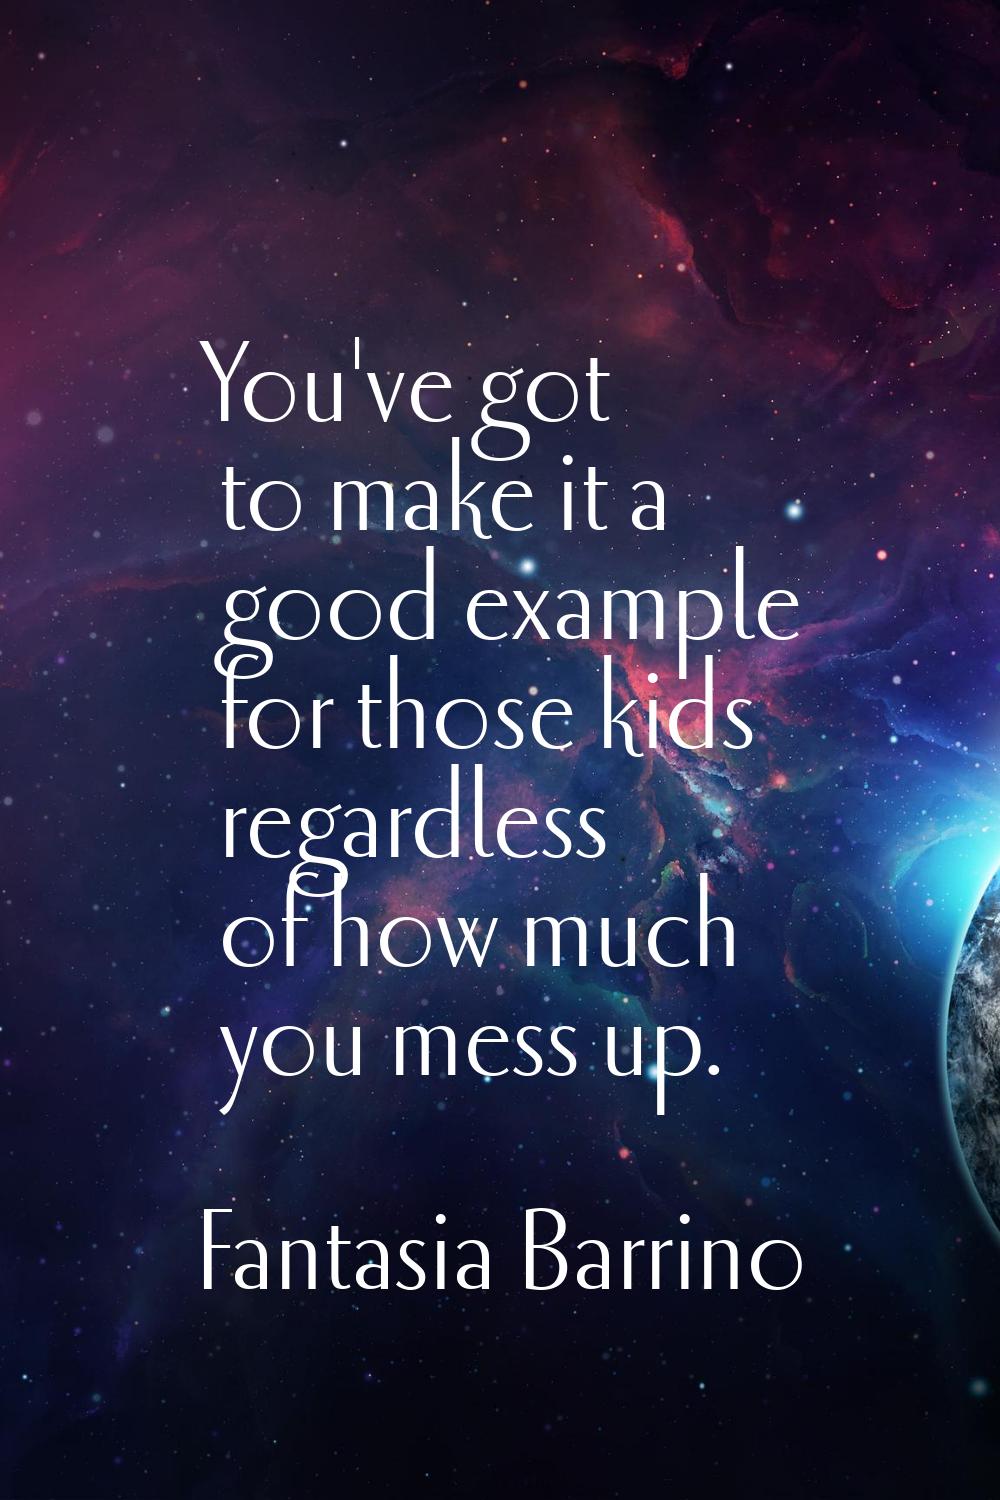 You've got to make it a good example for those kids regardless of how much you mess up.